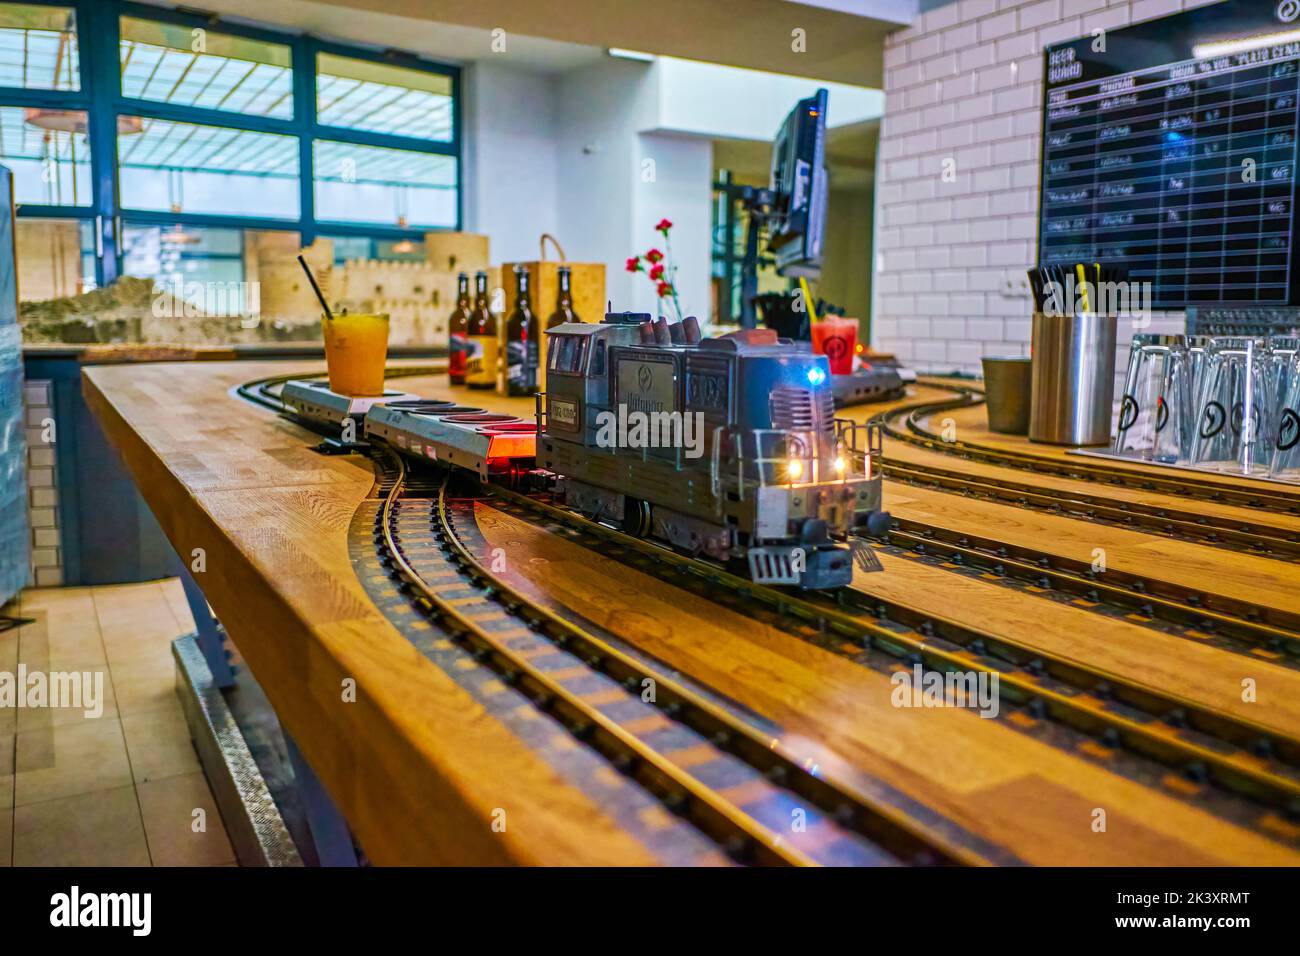 PRAGUE, CZECH REPUBLIC - MARCH 12, 2022: The small train delivering beverage to the client of Vytopna restaurant, on March 12 in Prague, Czech Republi Stock Photo